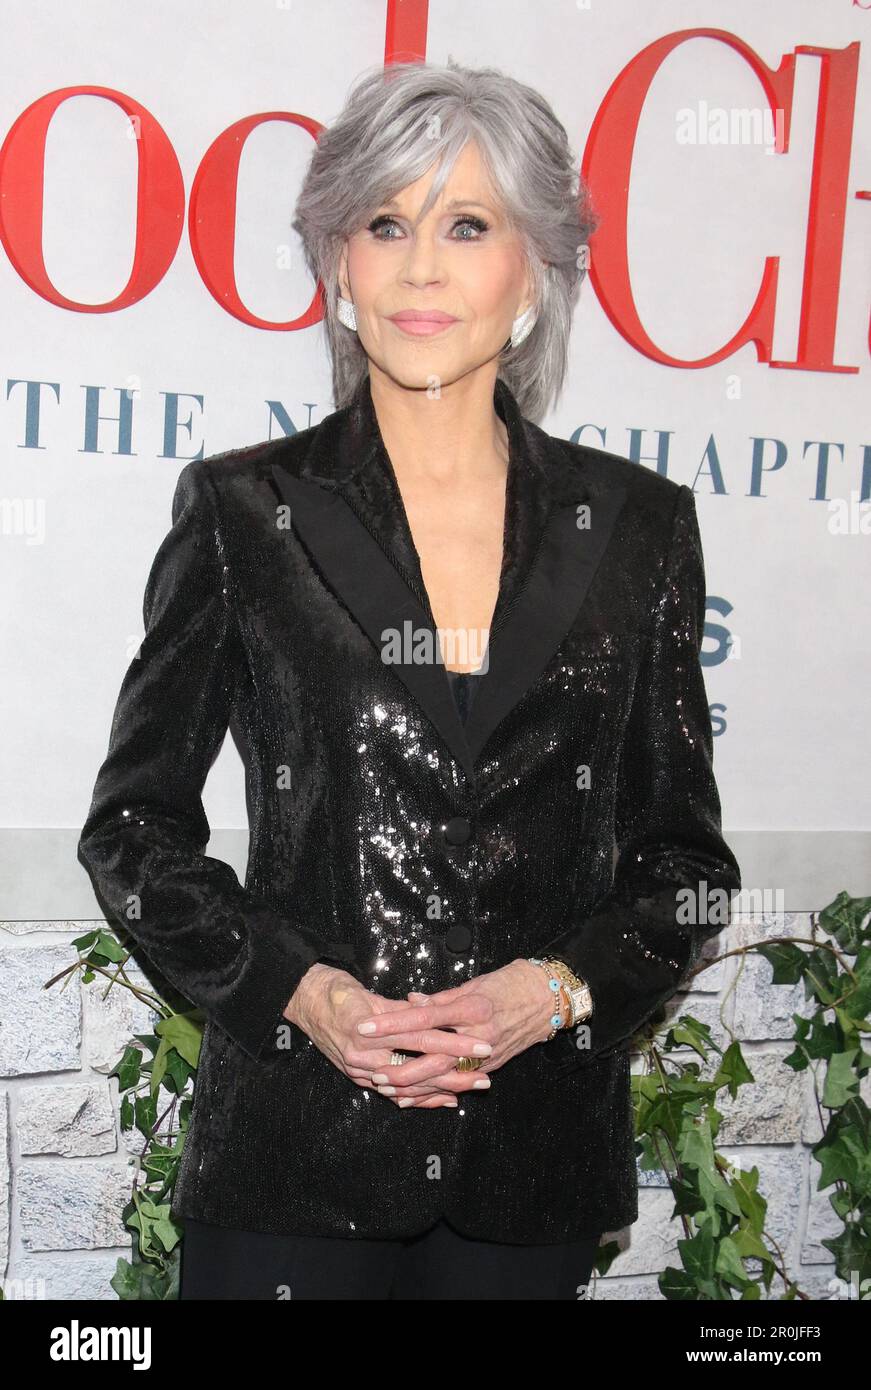 New York, NY, USA. 8th May, 2023. Jane Fonda at the NY Premiere Of Book Club: The Next Chapter at AMC Lincoln Square 13 in New York City on May 8, 2023. Credit: Rw/Media Punch/Alamy Live News Stock Photo